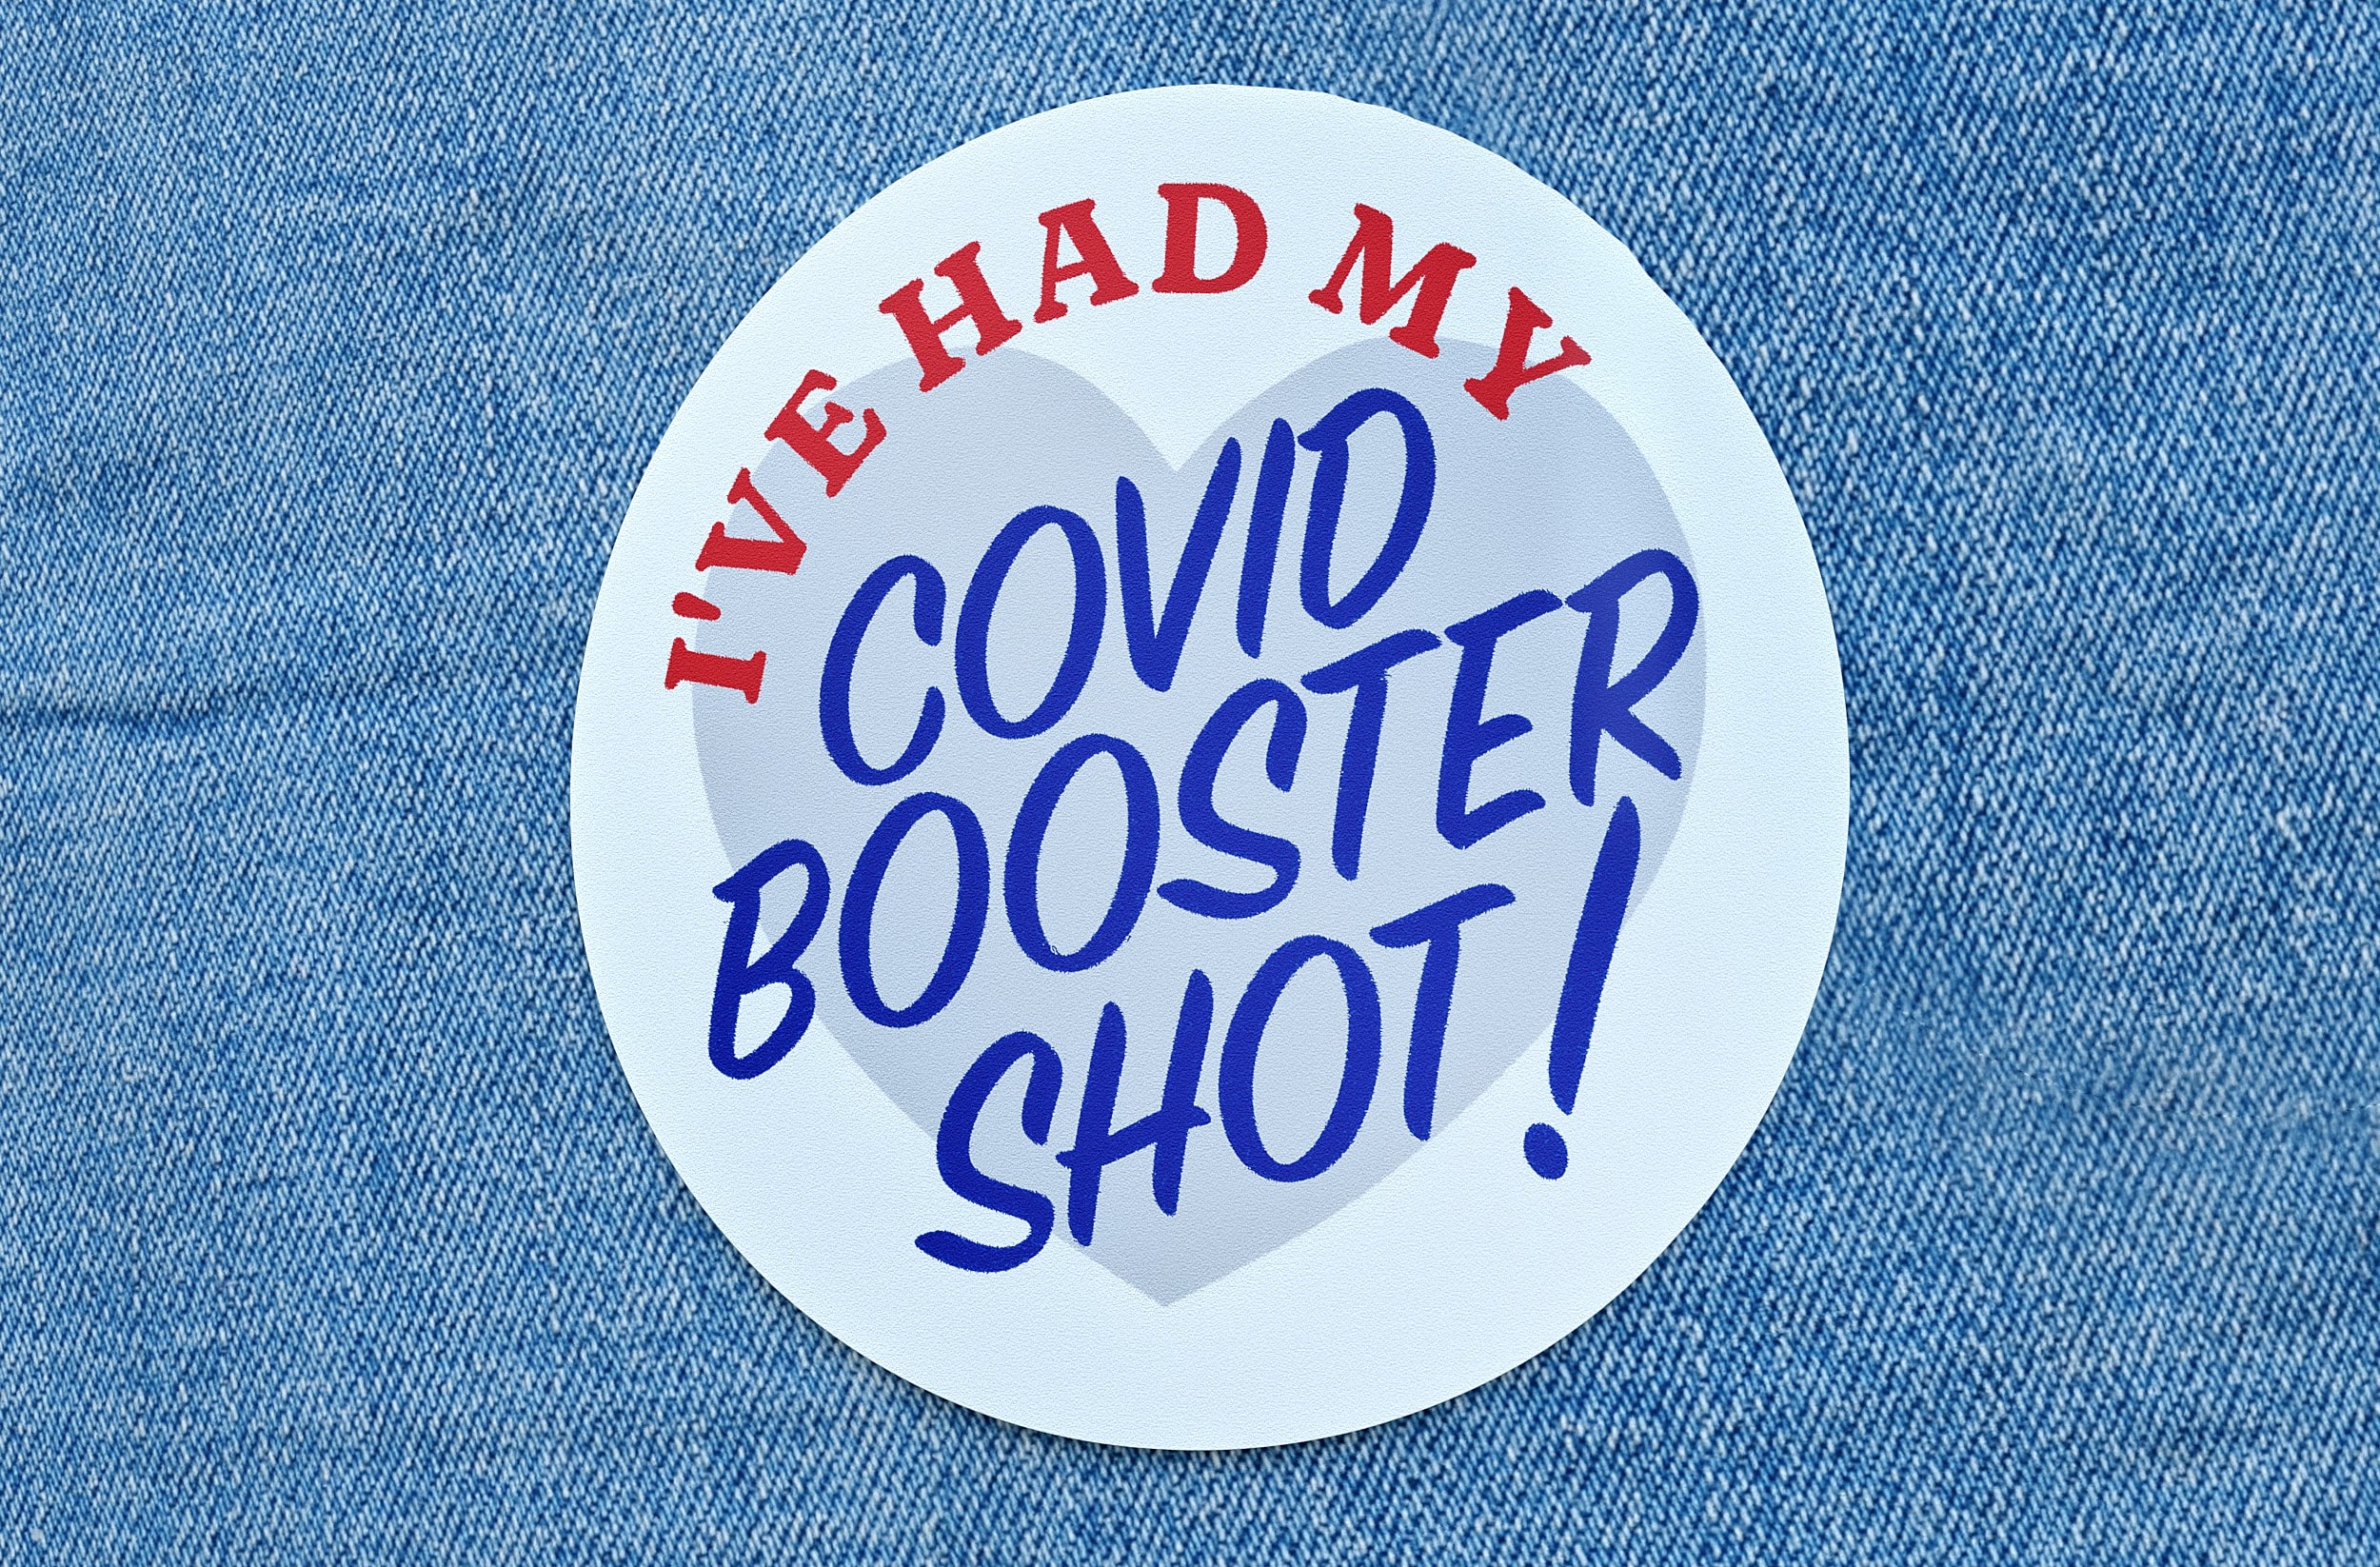 CDC Expands Booster Shot Eligibility to All Adults TIG Advisors